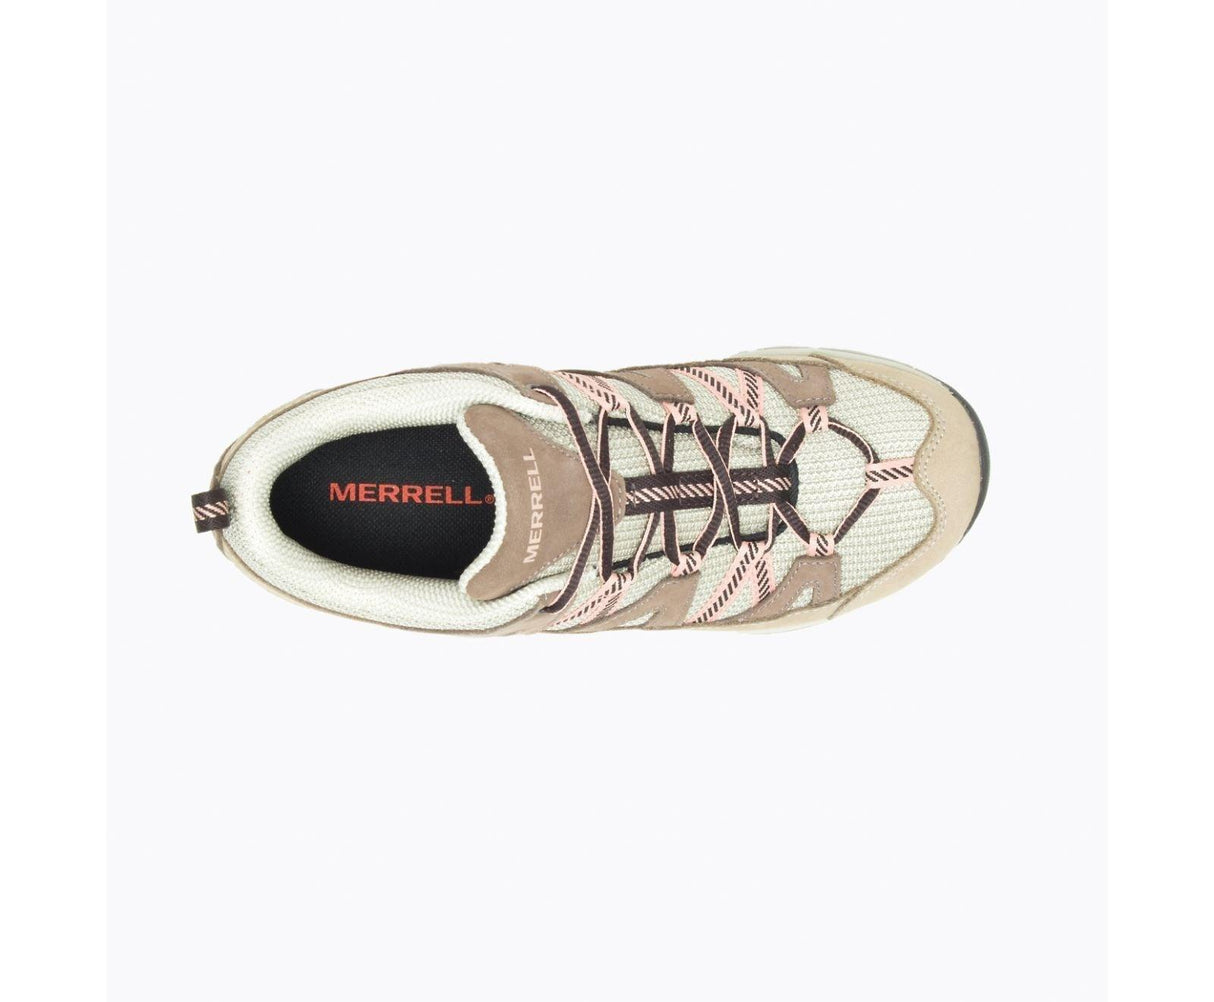 Merrell Women's Siren Sport 3 Shoes Wide - A&M Clothing & Shoes